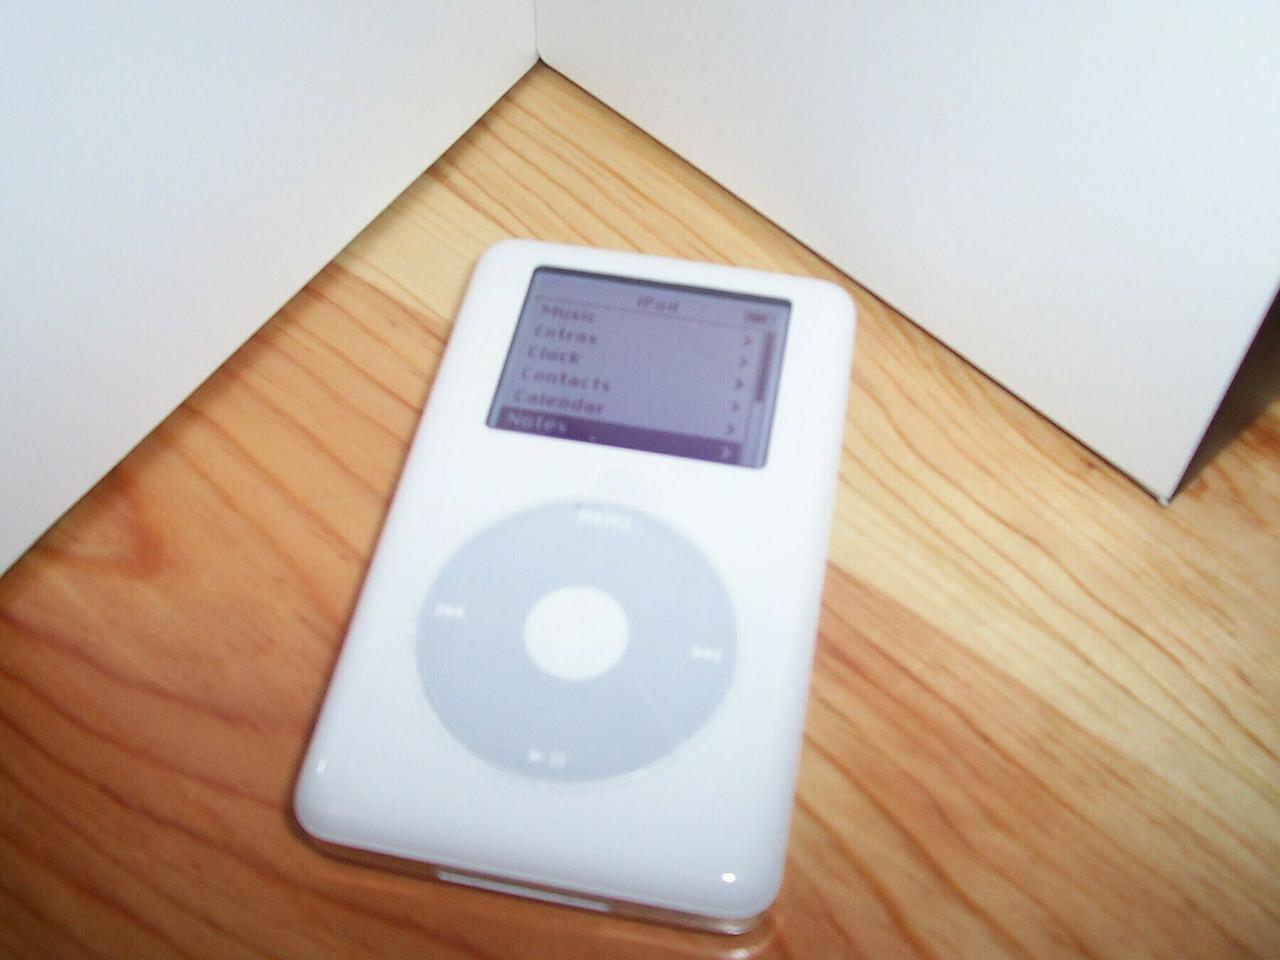 Picture of my first iPod